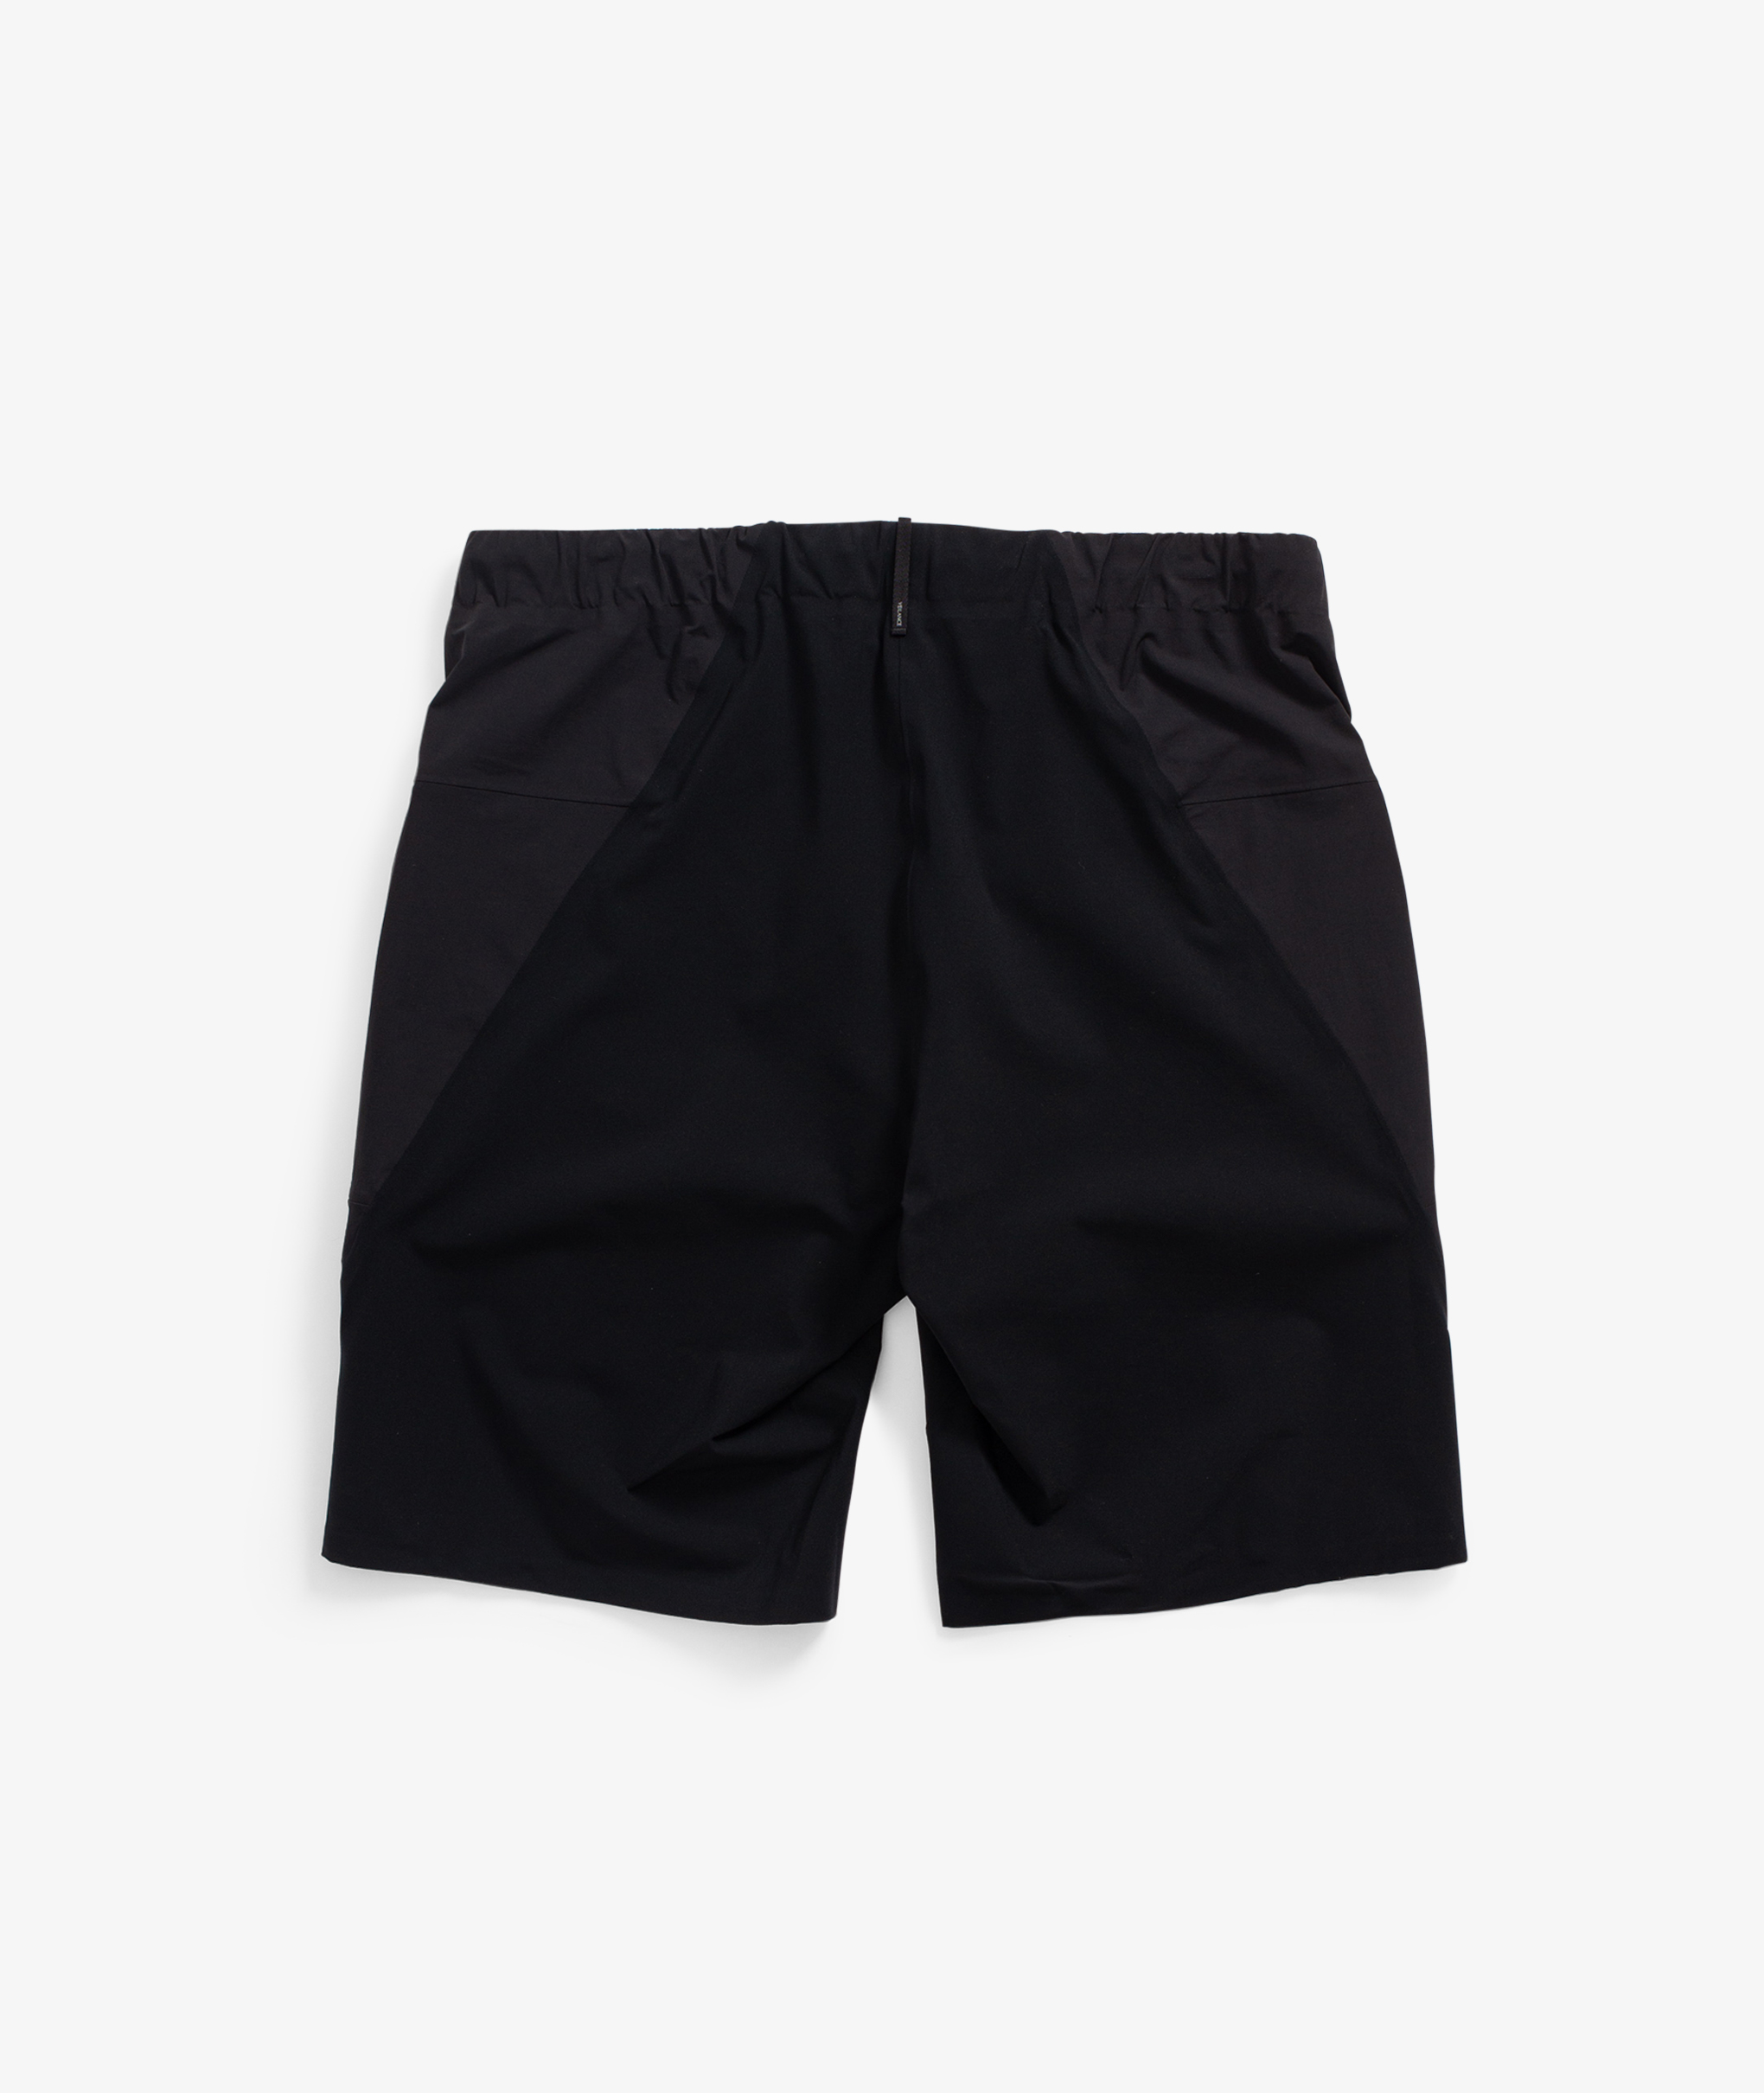 Norse Store | Shipping Worldwide - Veilance SECANT COMP SHORT M